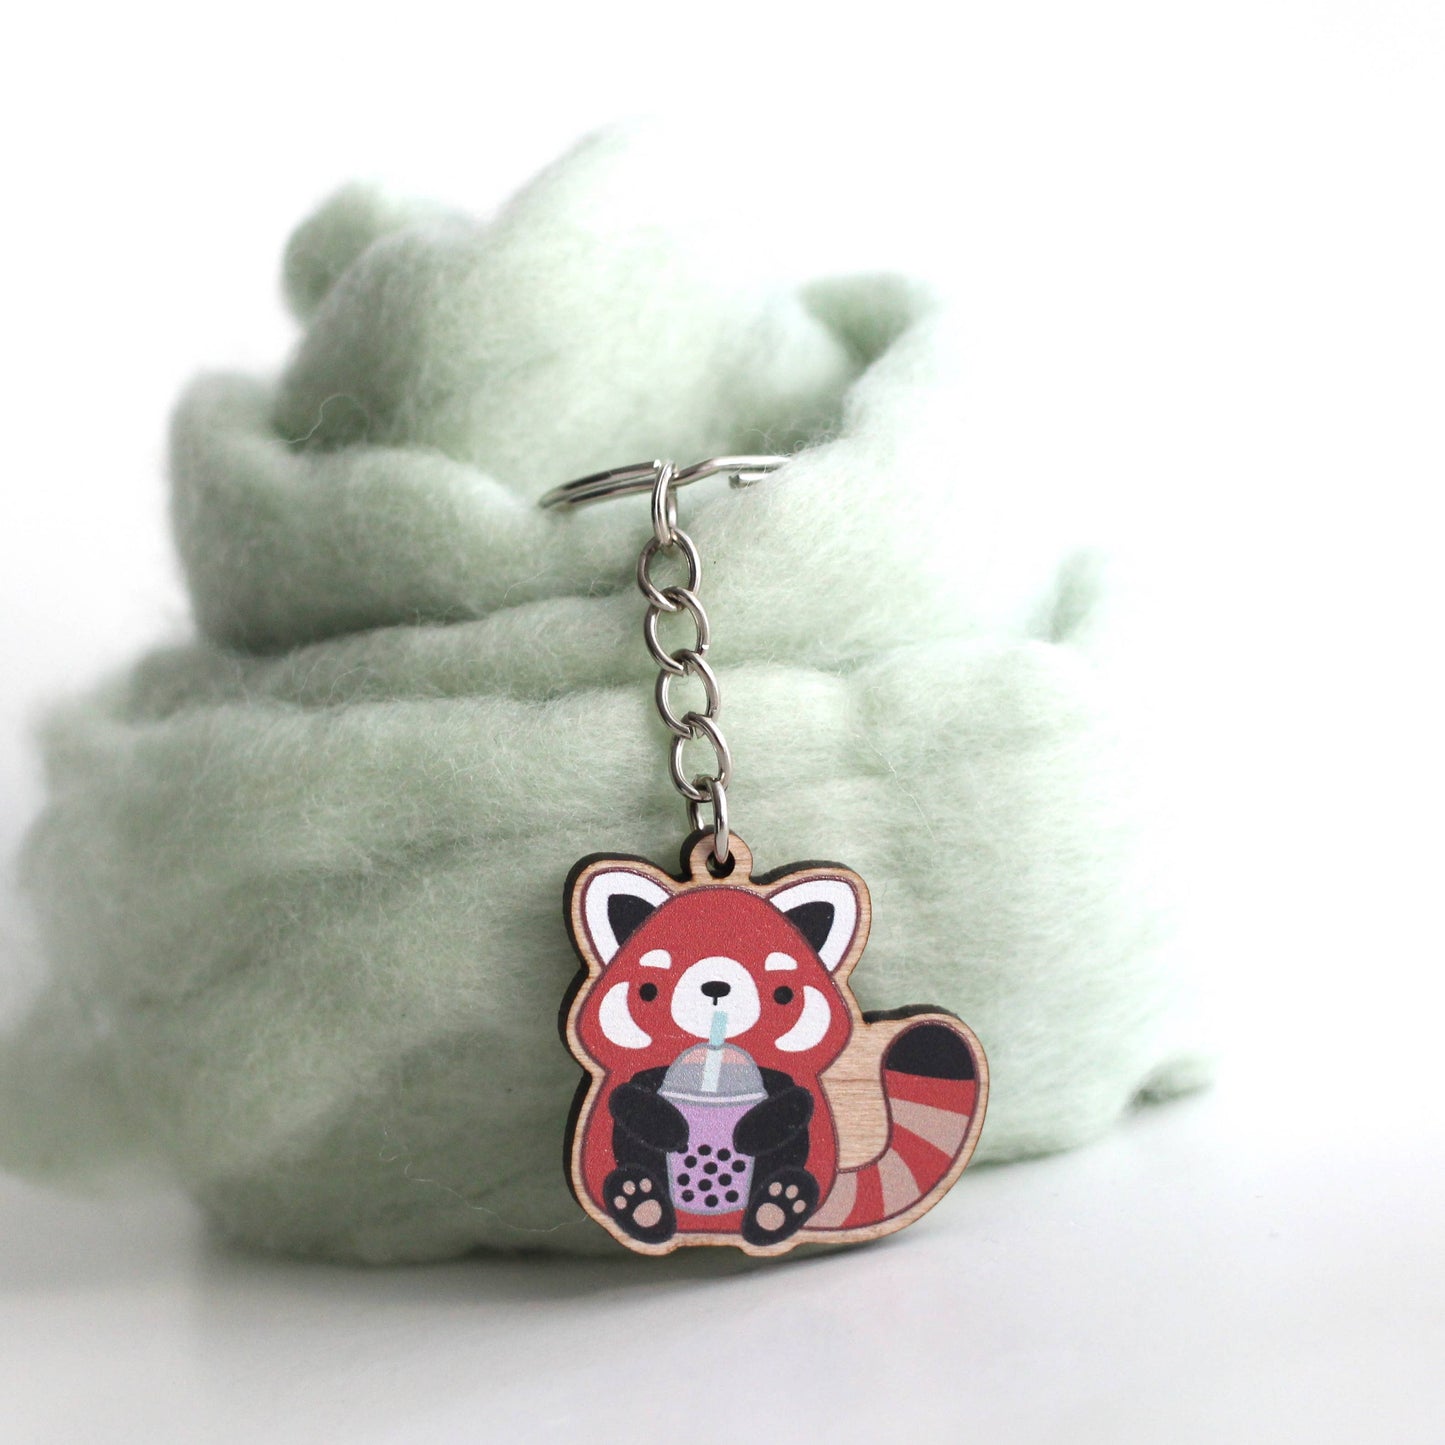 Red Panda holding Bubble Tea / Boba Wooden Keychain